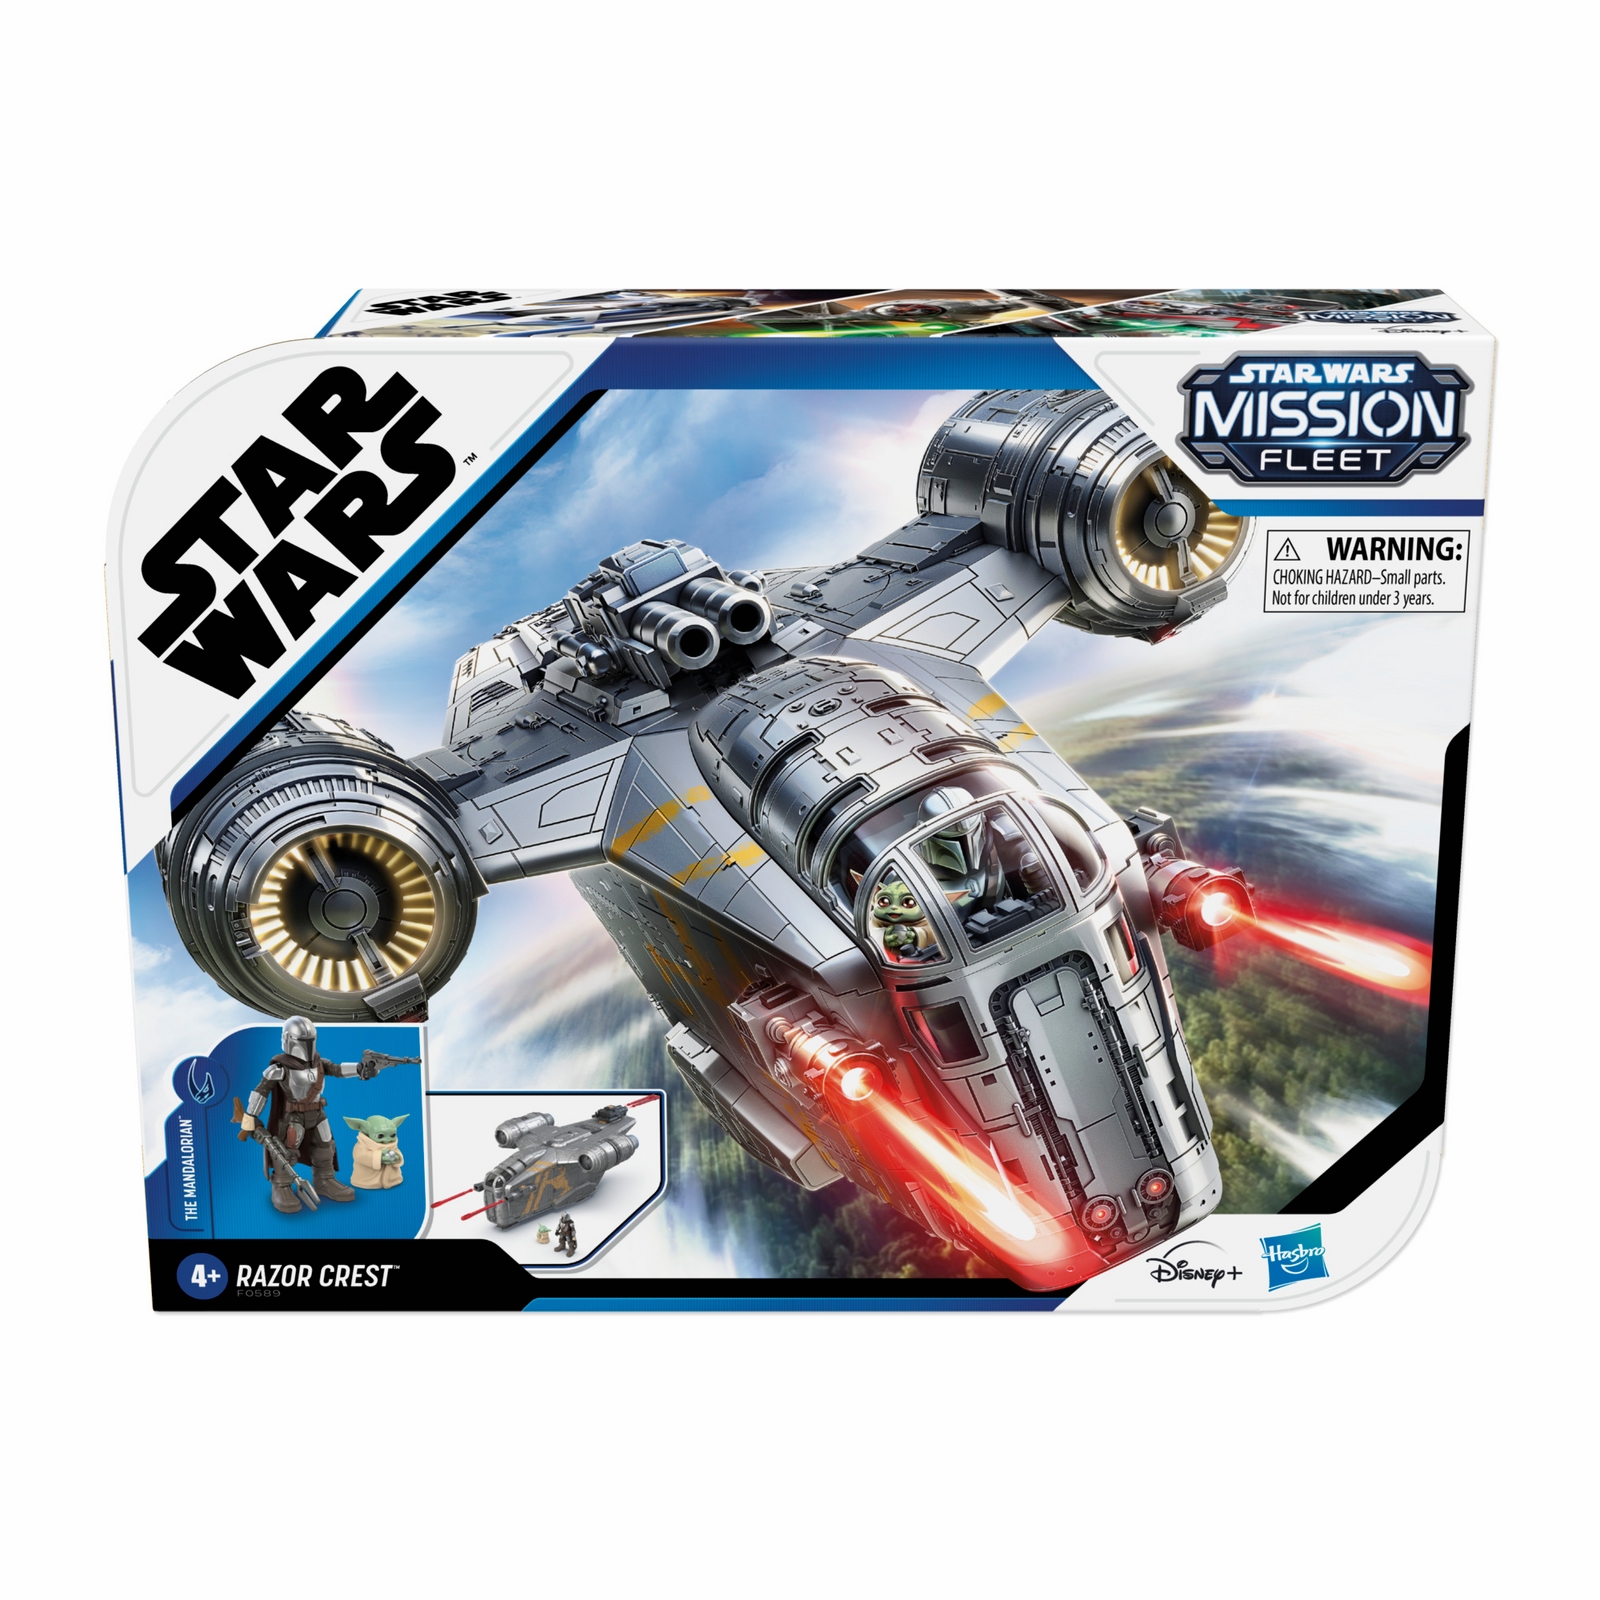 STAR WARS MISSION FLEET RAZOR CREST OUTER RIM RUN Figure and Vehicle 2-Pack - in pck.jpg